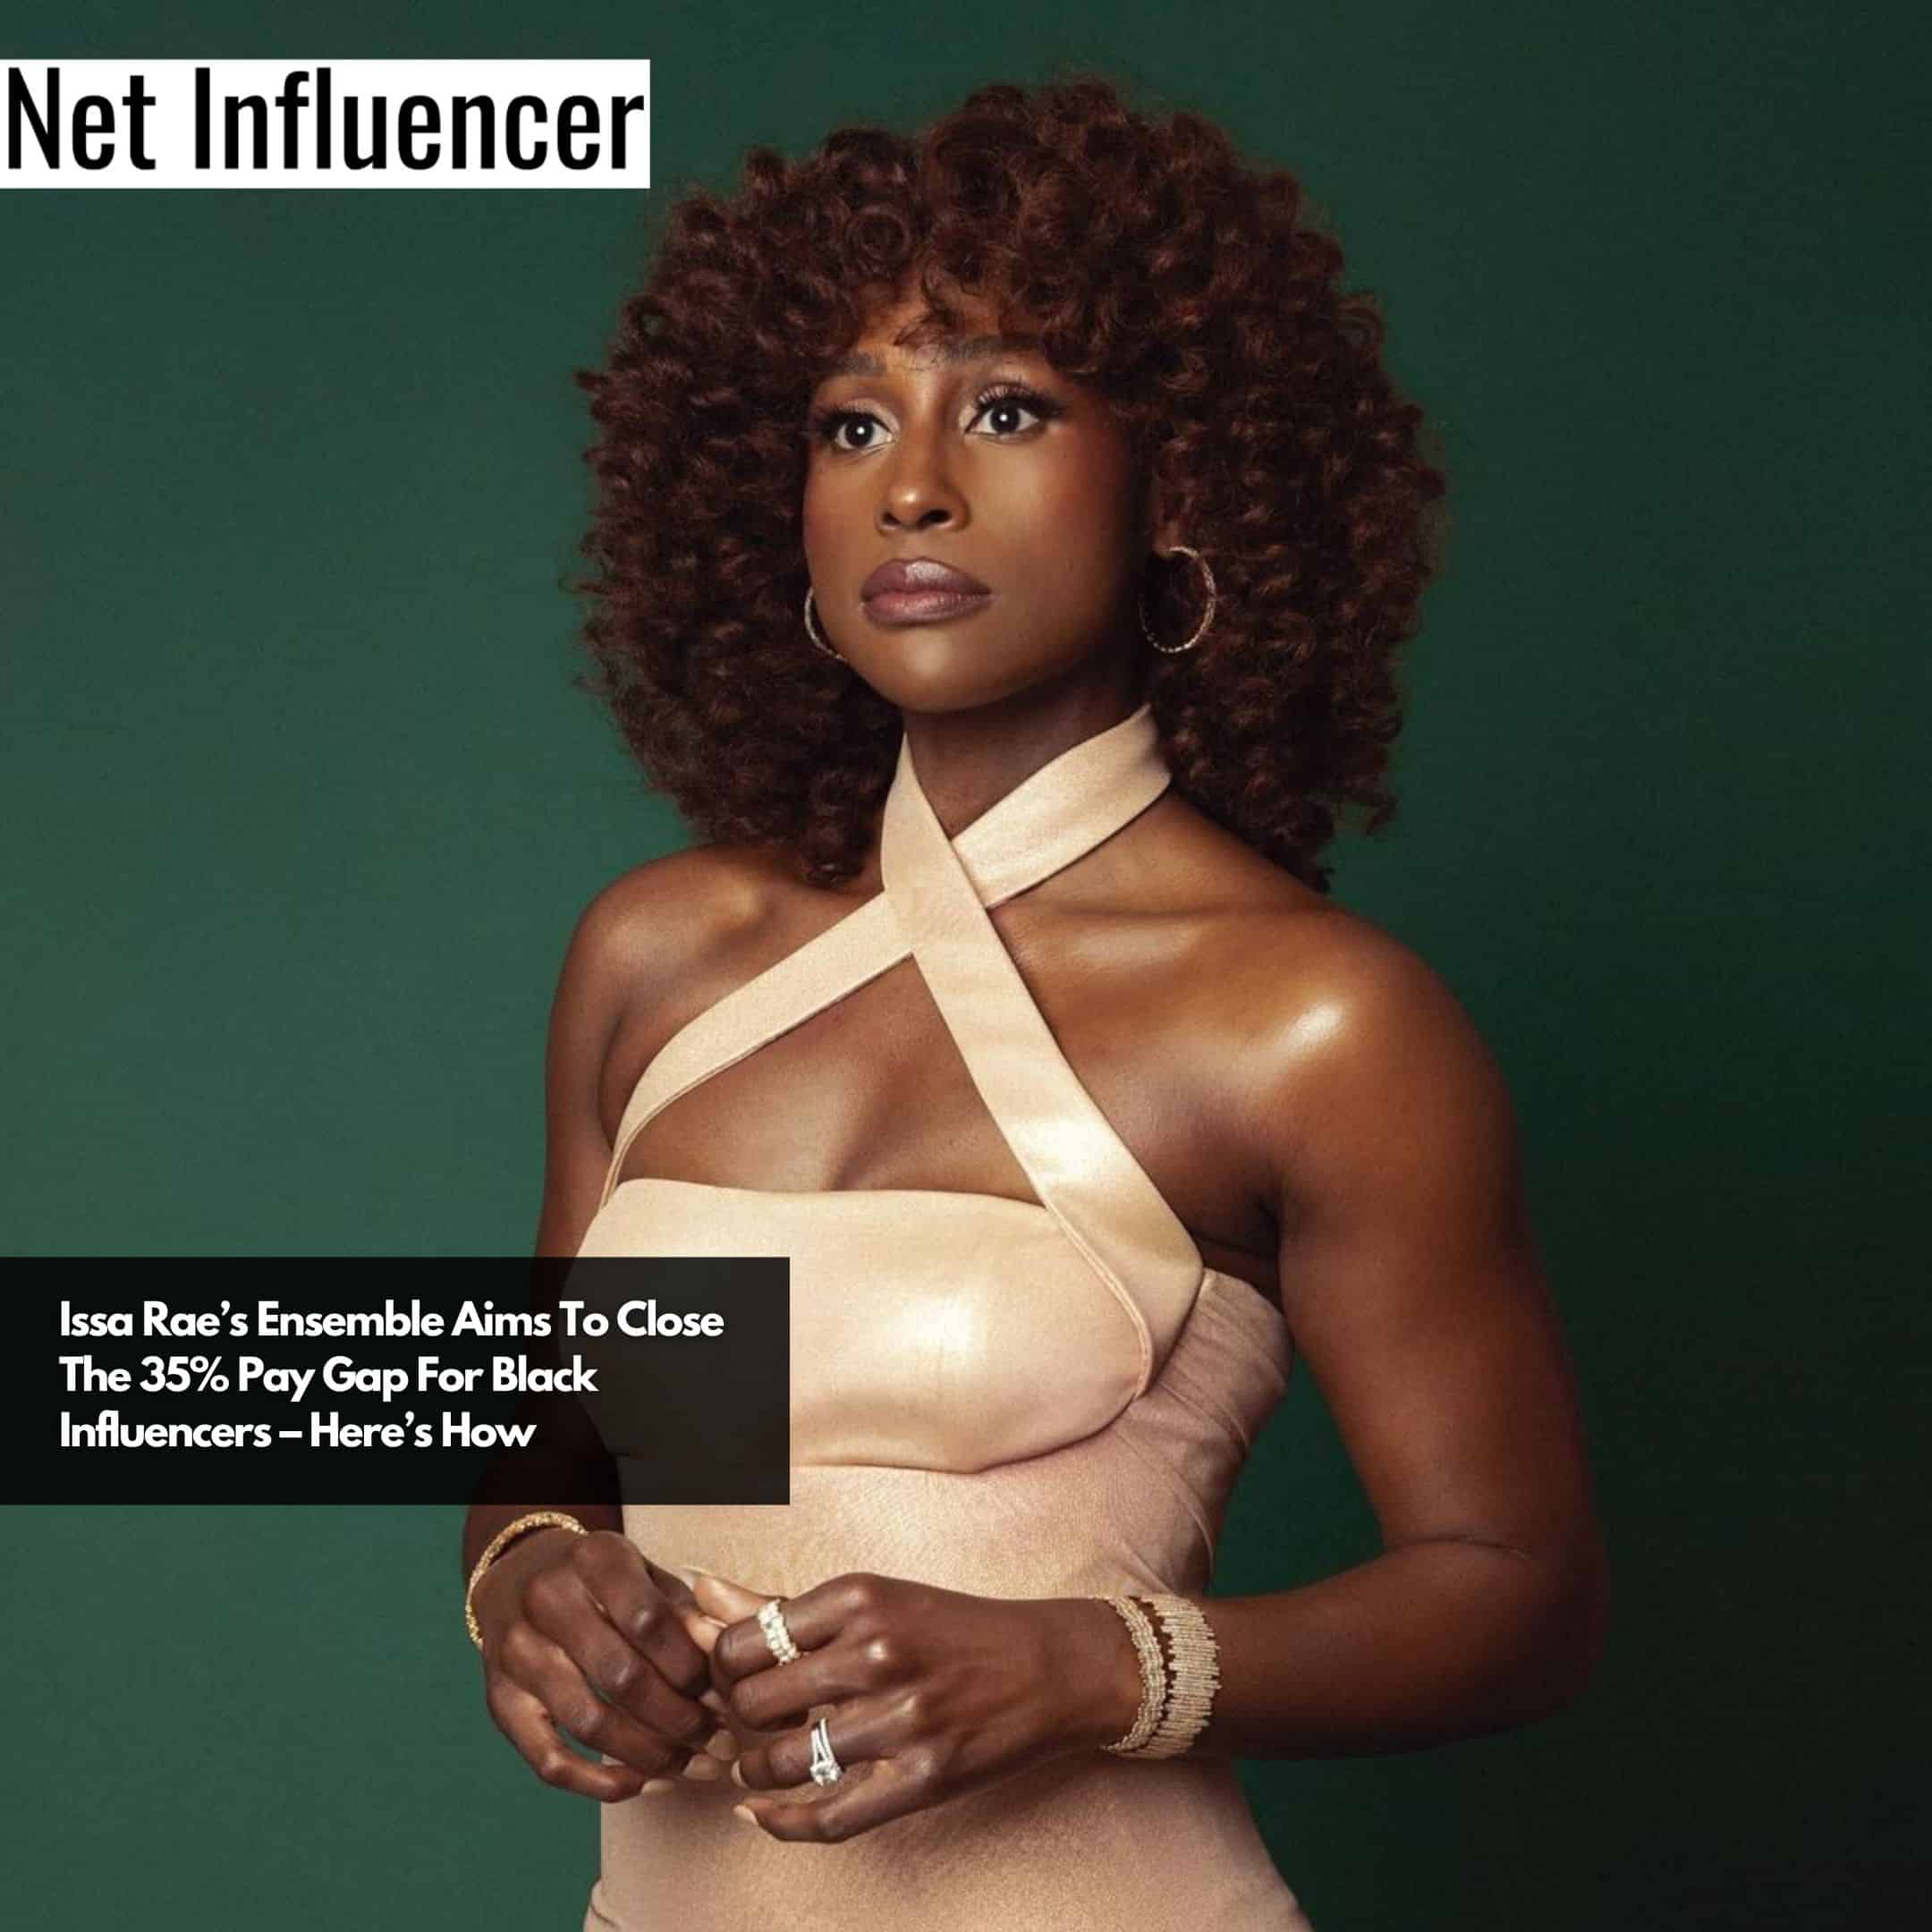 Issa Rae’s Ensemble Aims To Close The 35% Pay Gap For Black Influencers – Here’s How